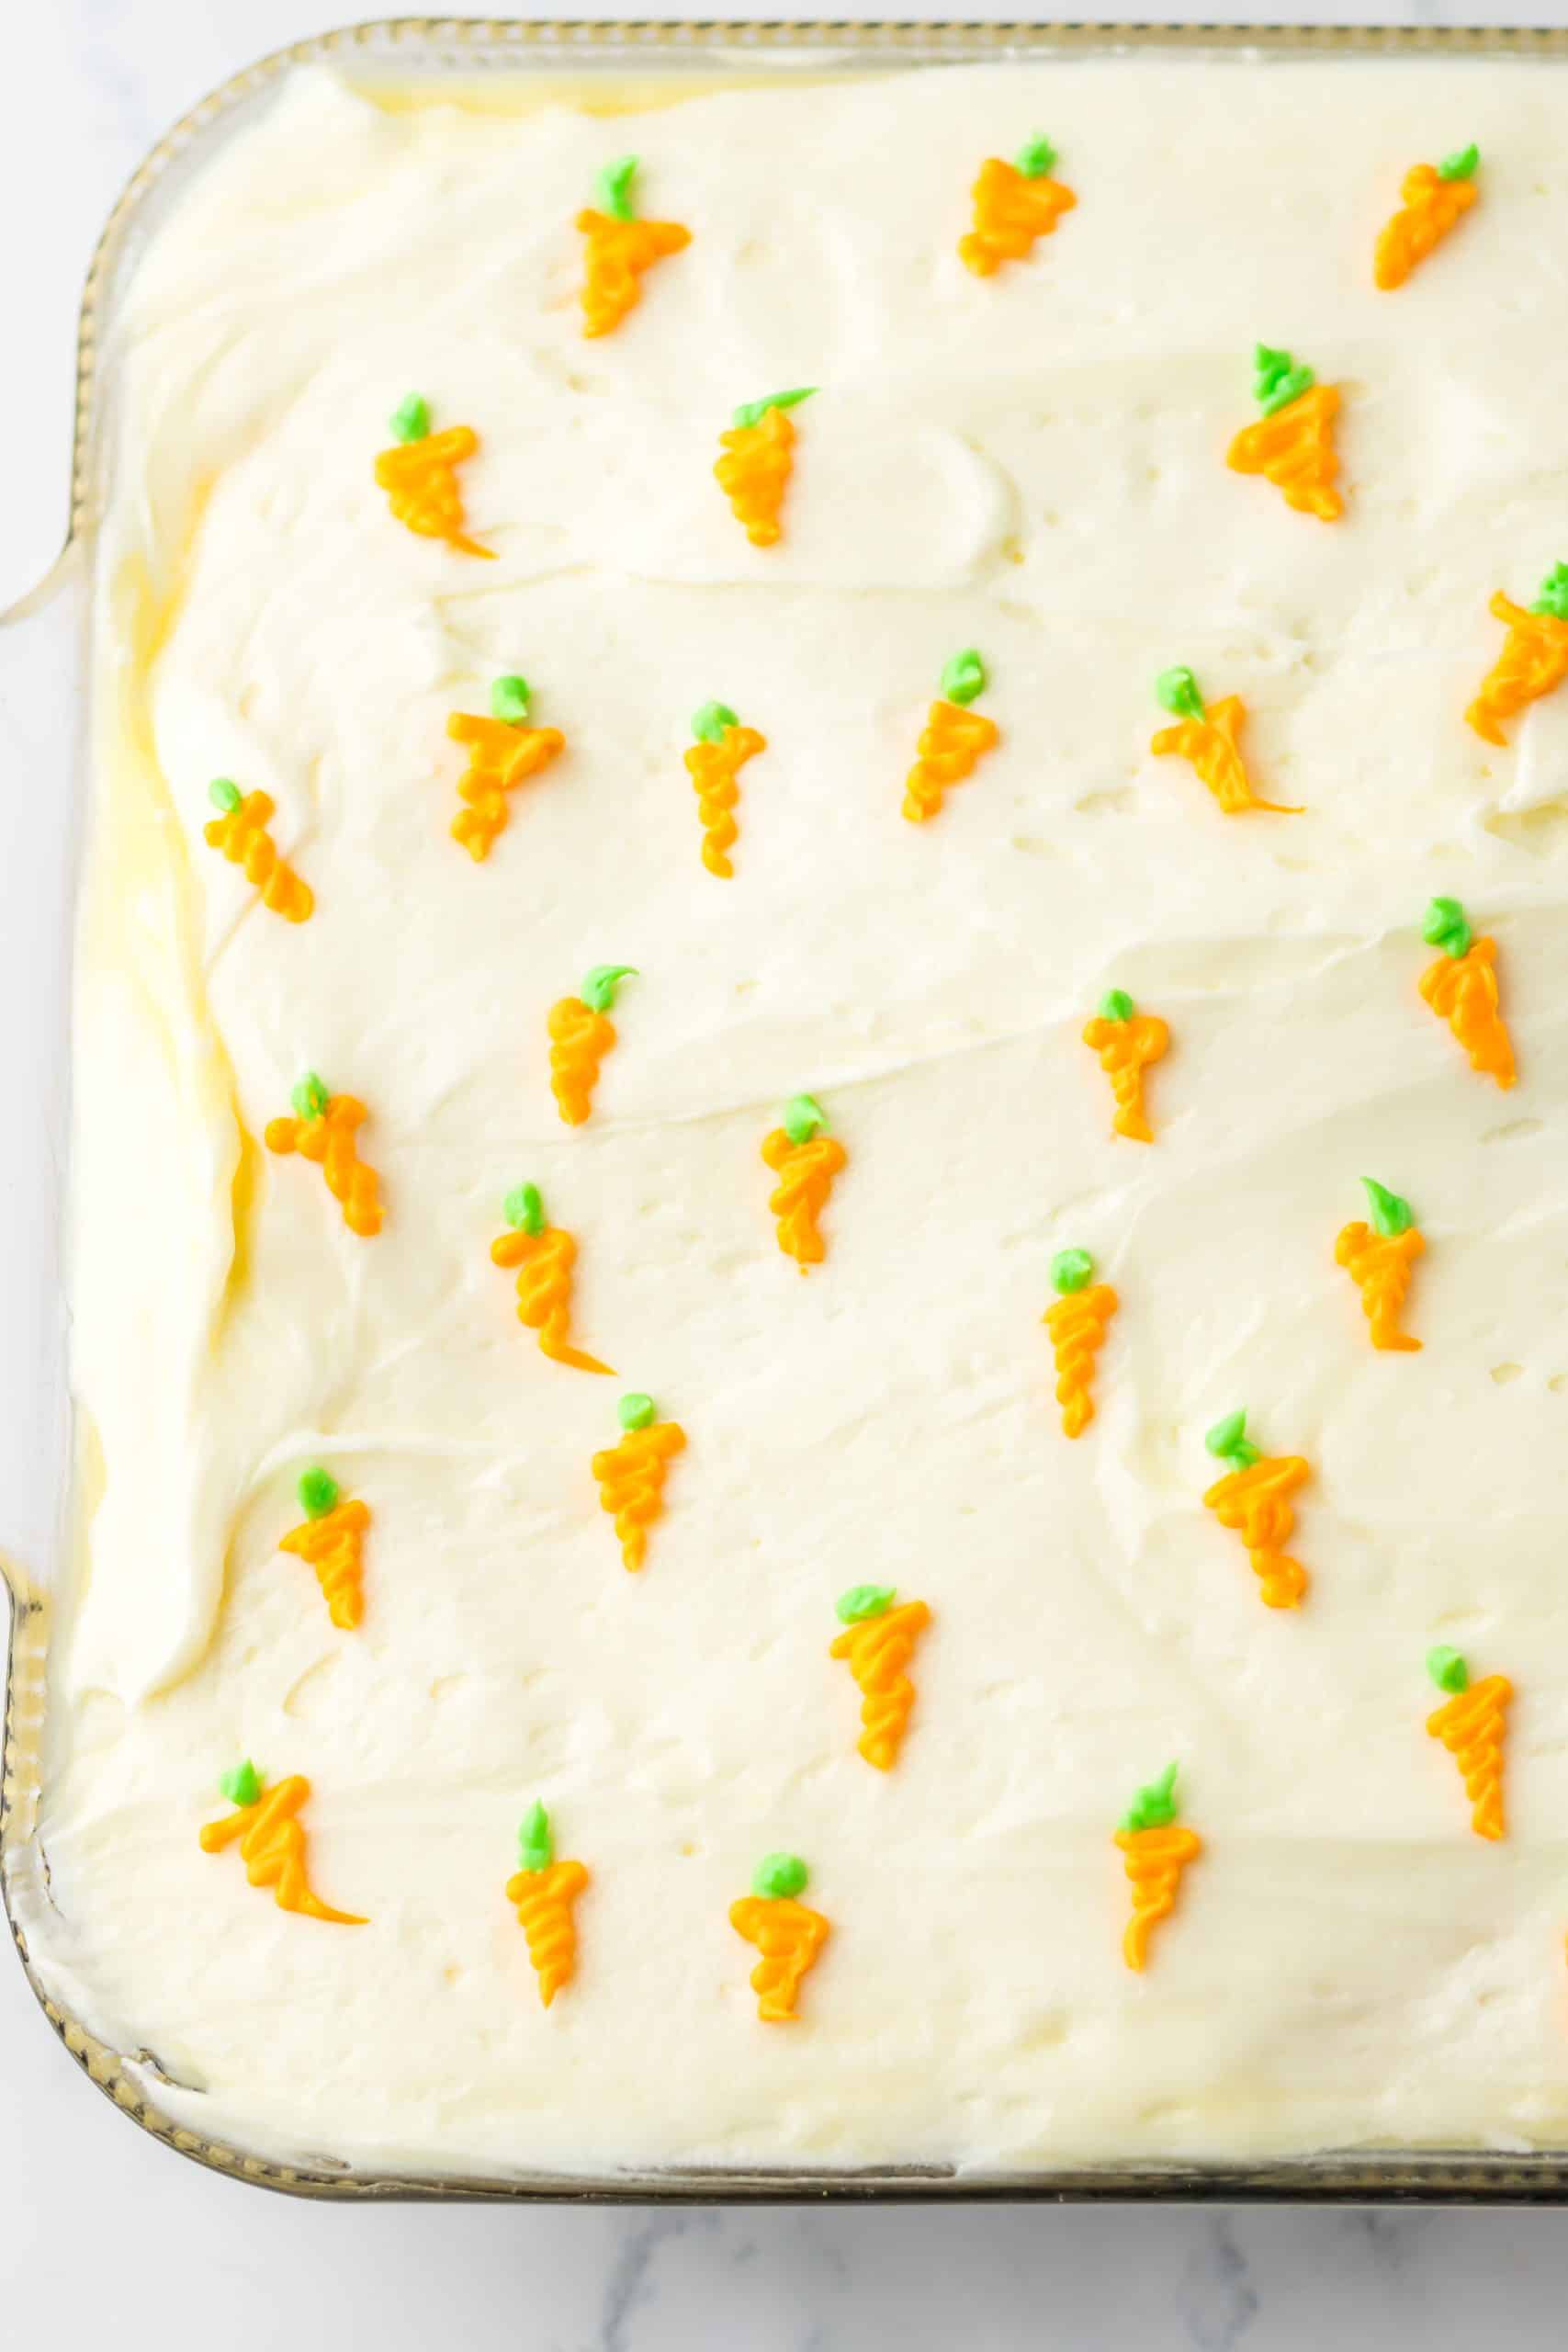 a decorated carrot cake poke cake in a 9x13 inch glass baking dish